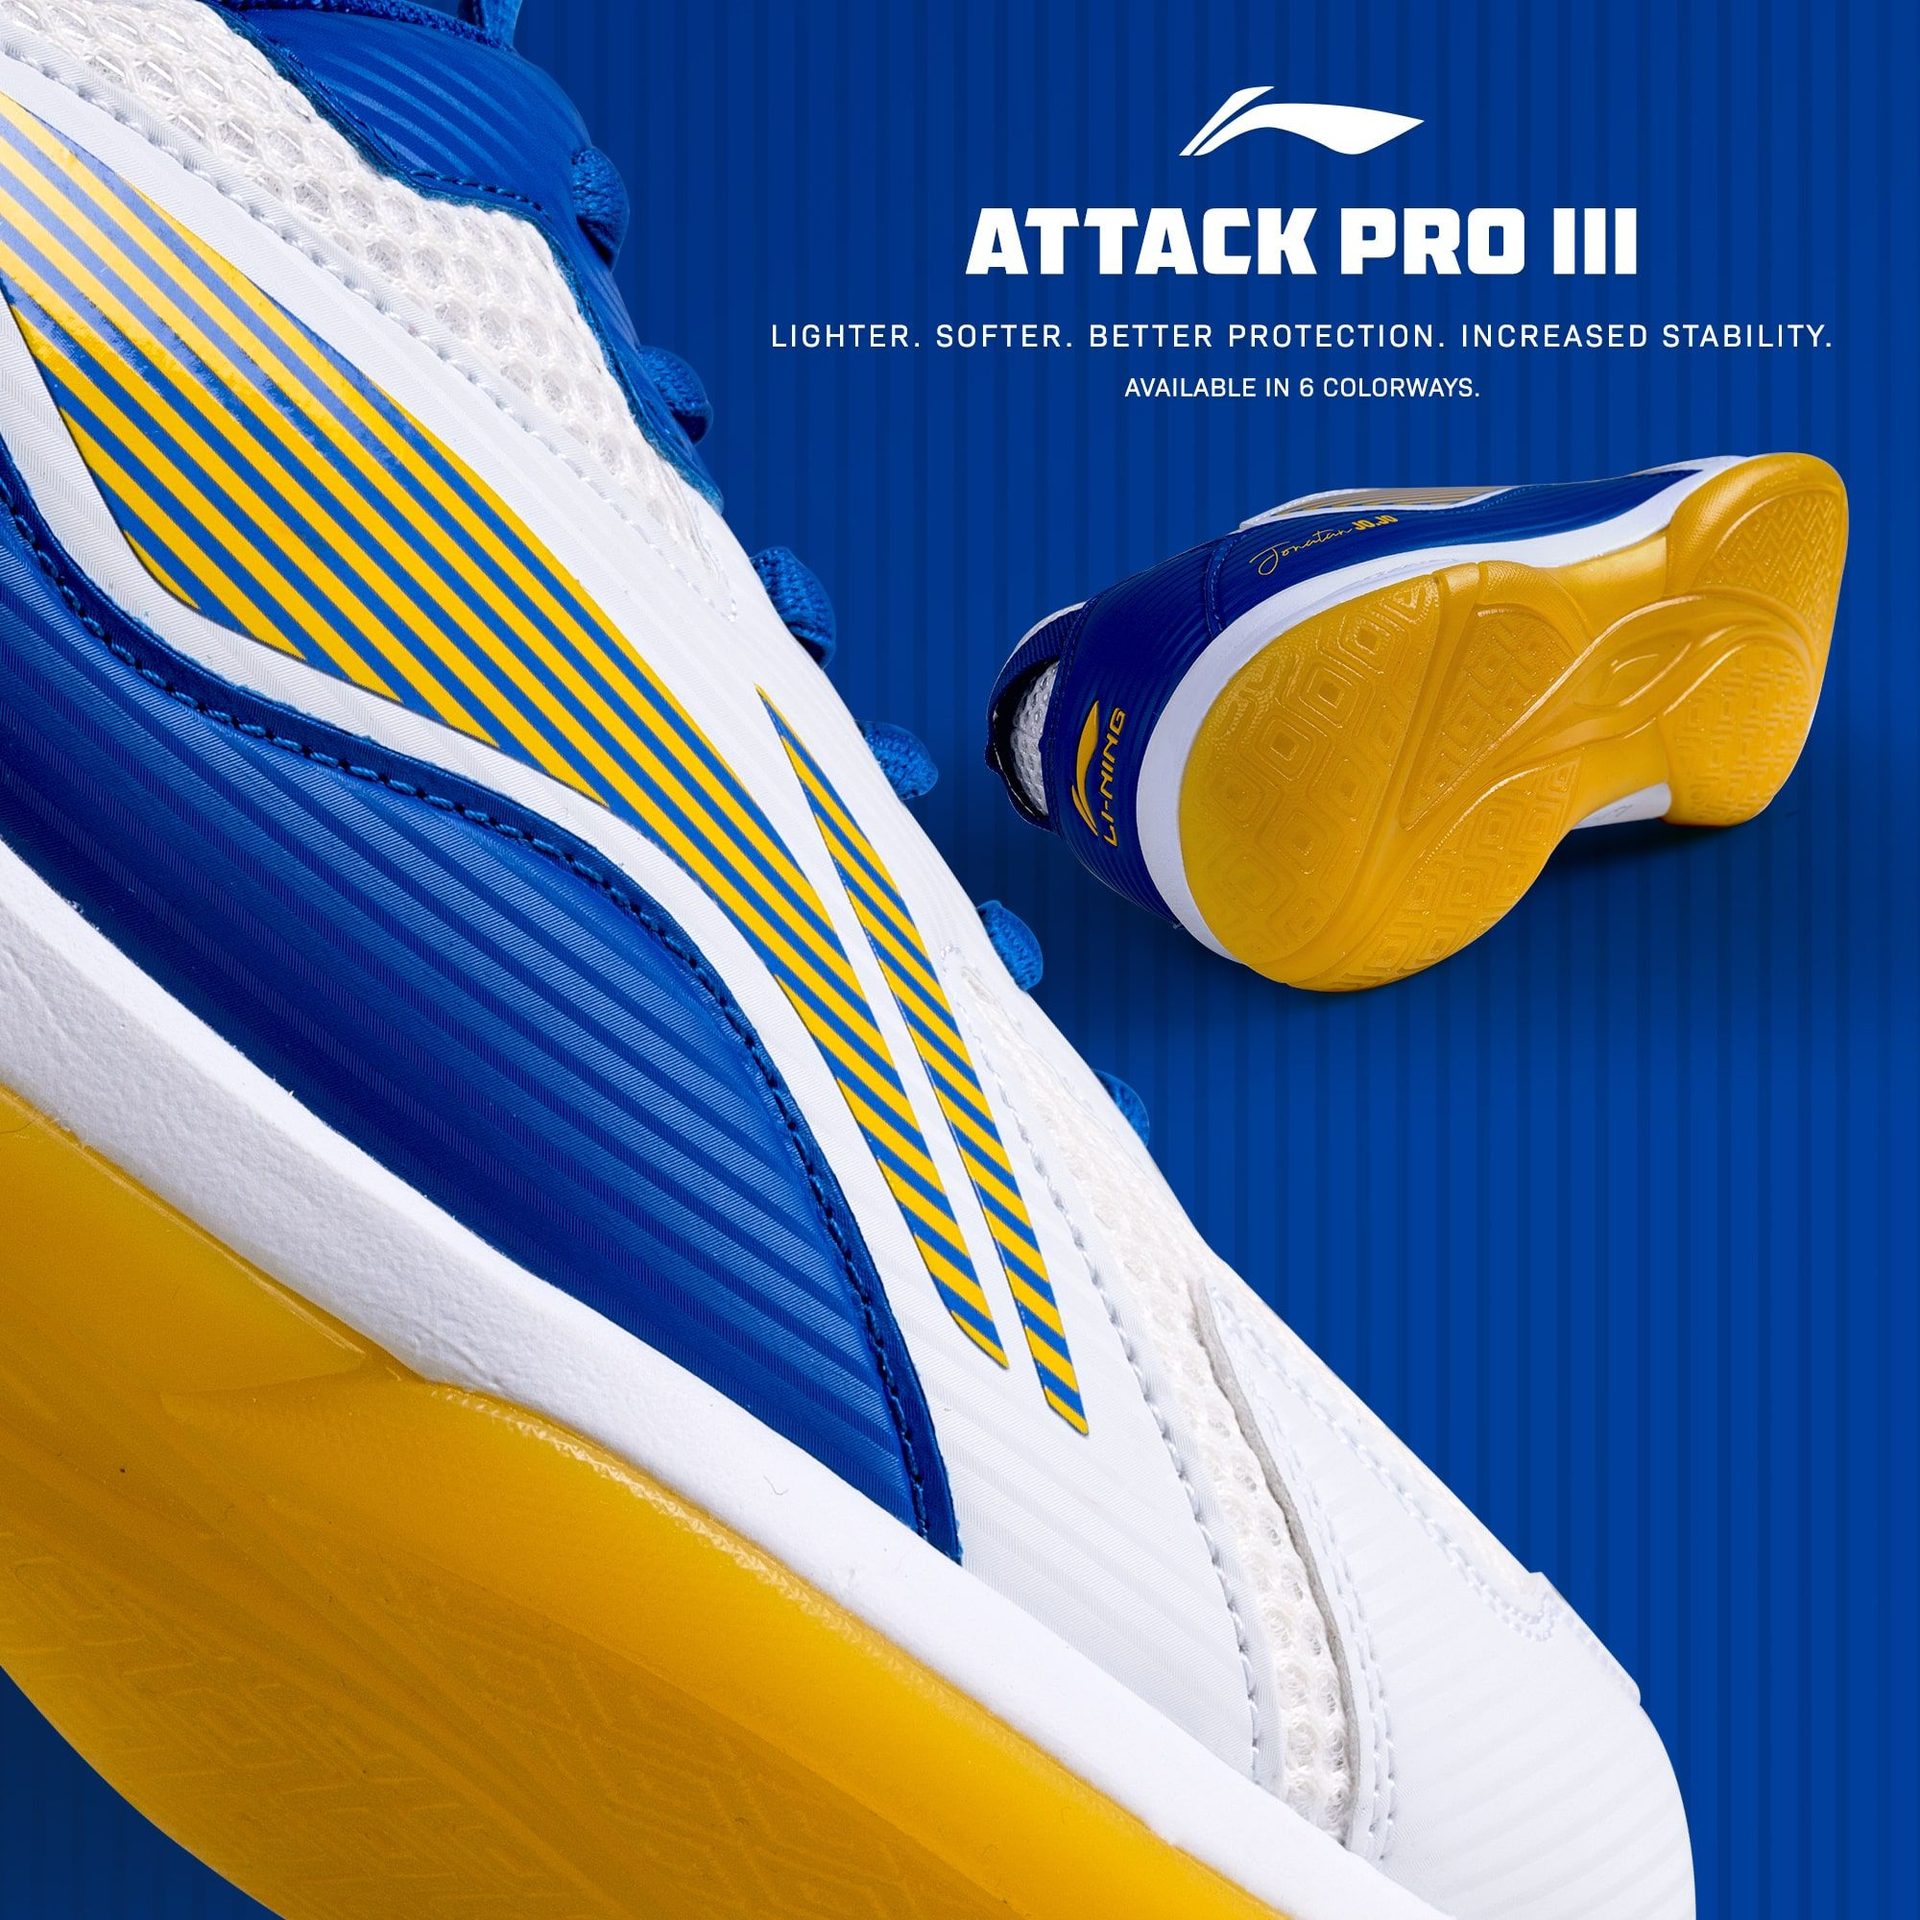 Attack Pro III - AMPLIFY YOUR AUDACITY.